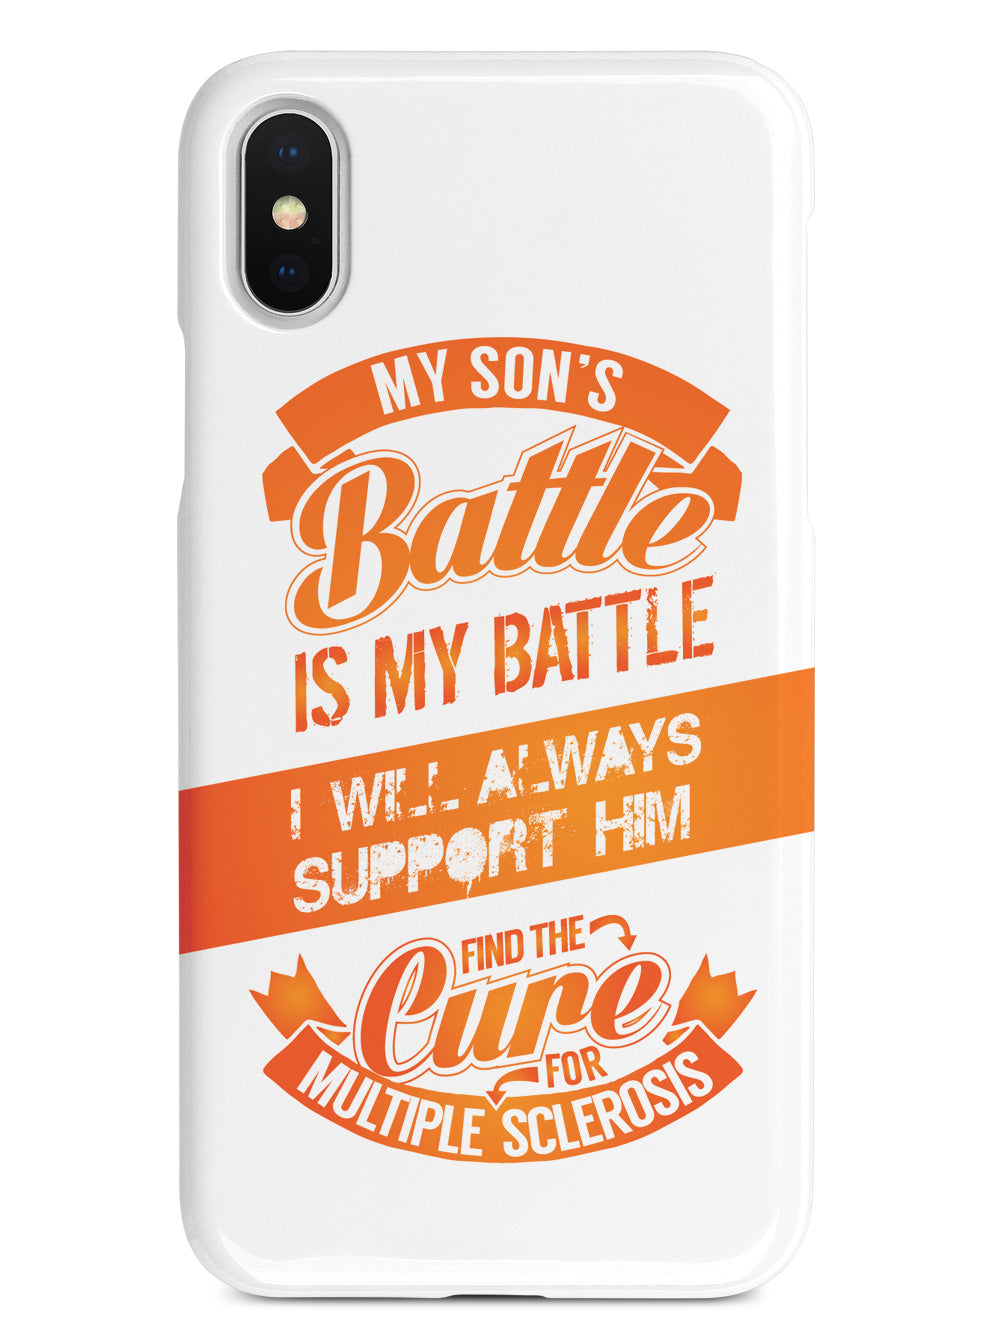 My Son's Battle - Multiple Sclerosis Awareness/Support Case